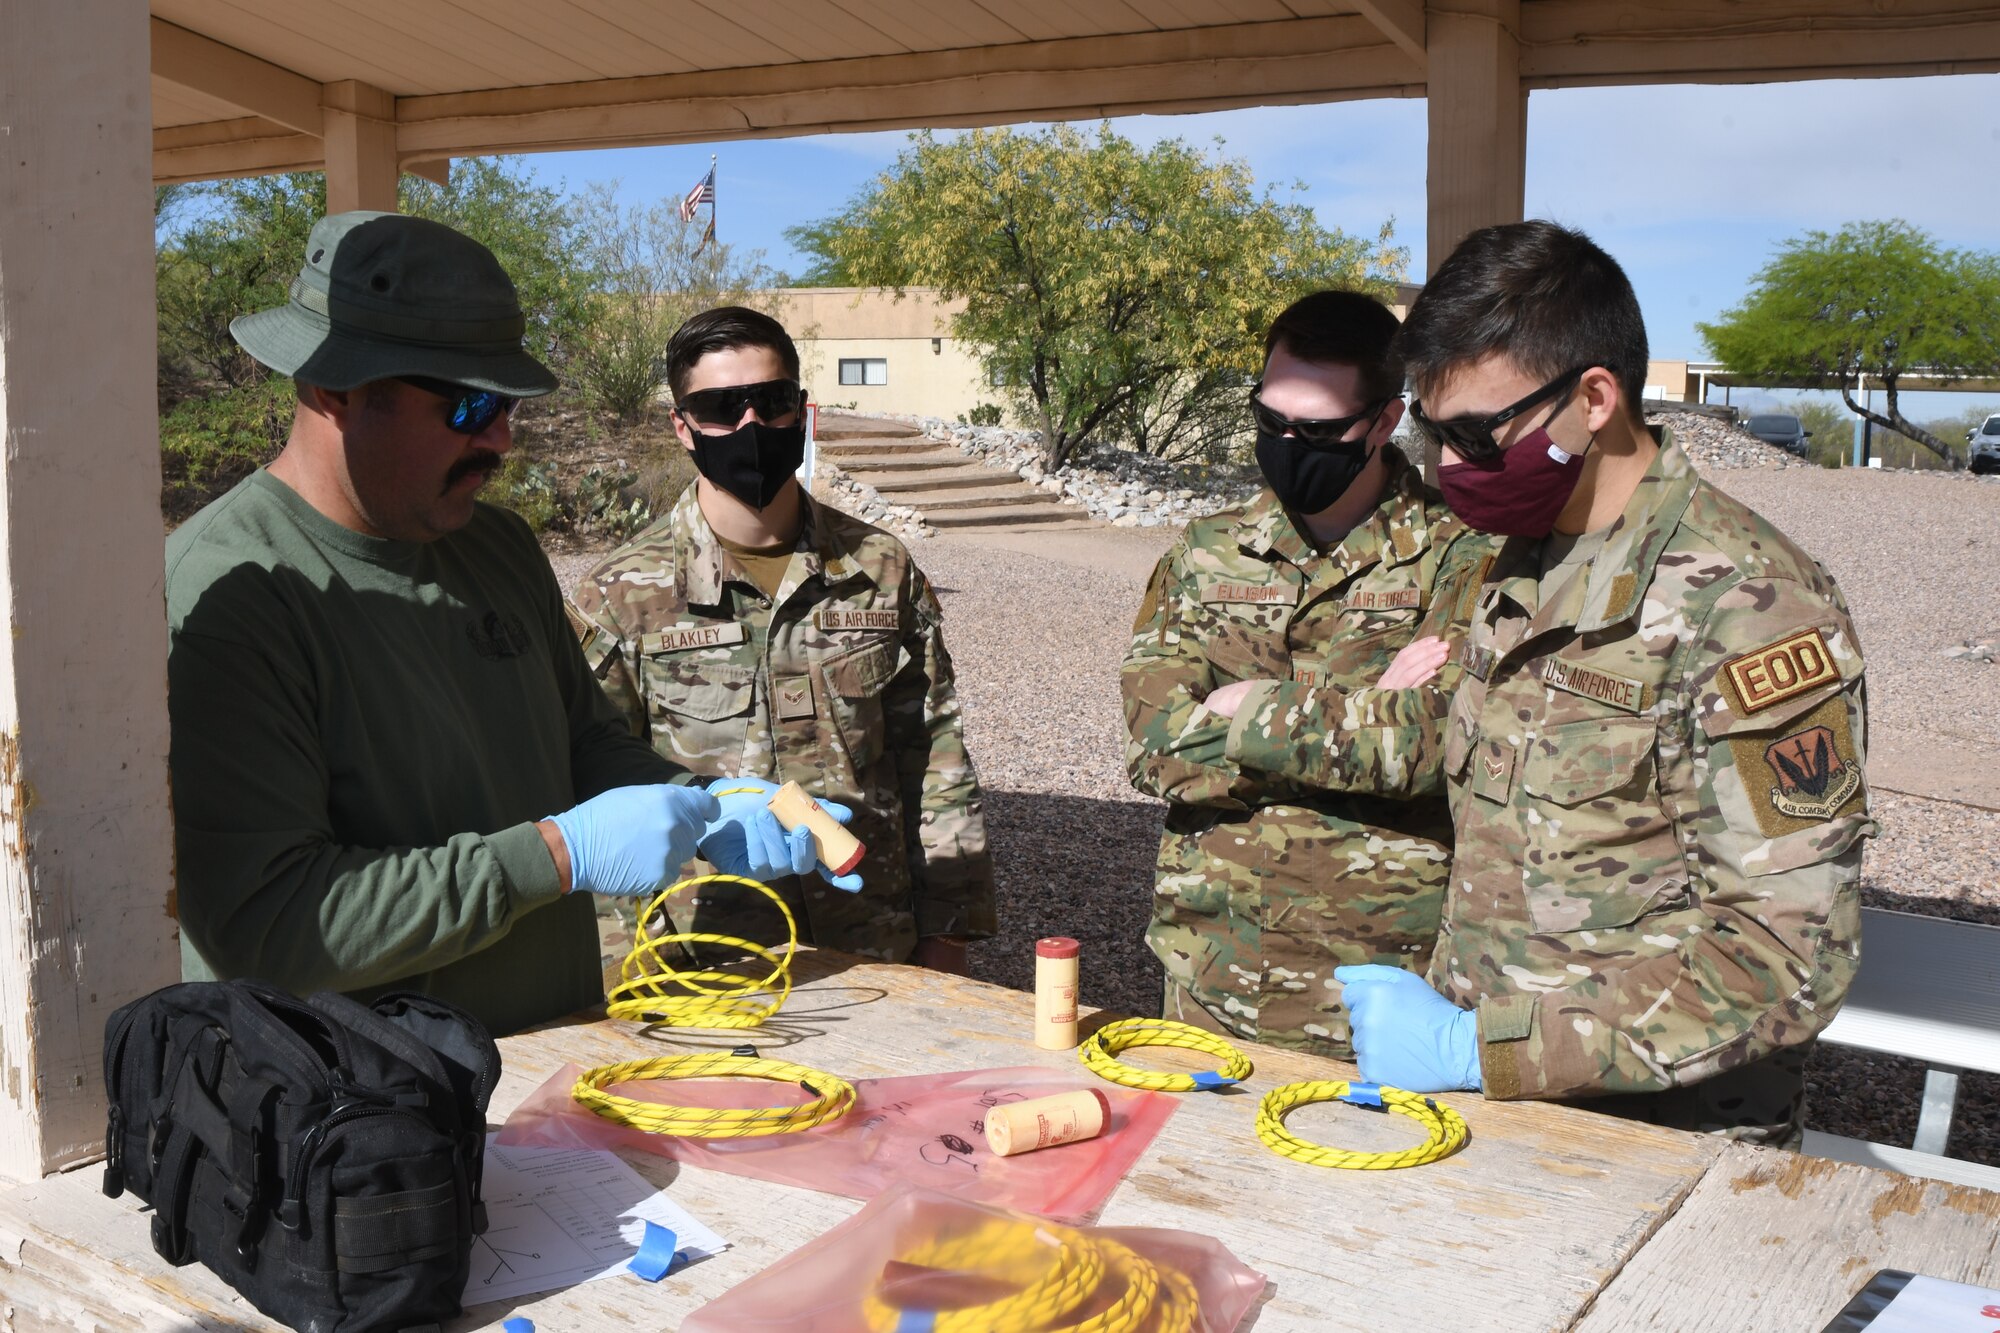 A picture of Airman and a member of the Tucson Bomb Squad preparing explosives for demolition training